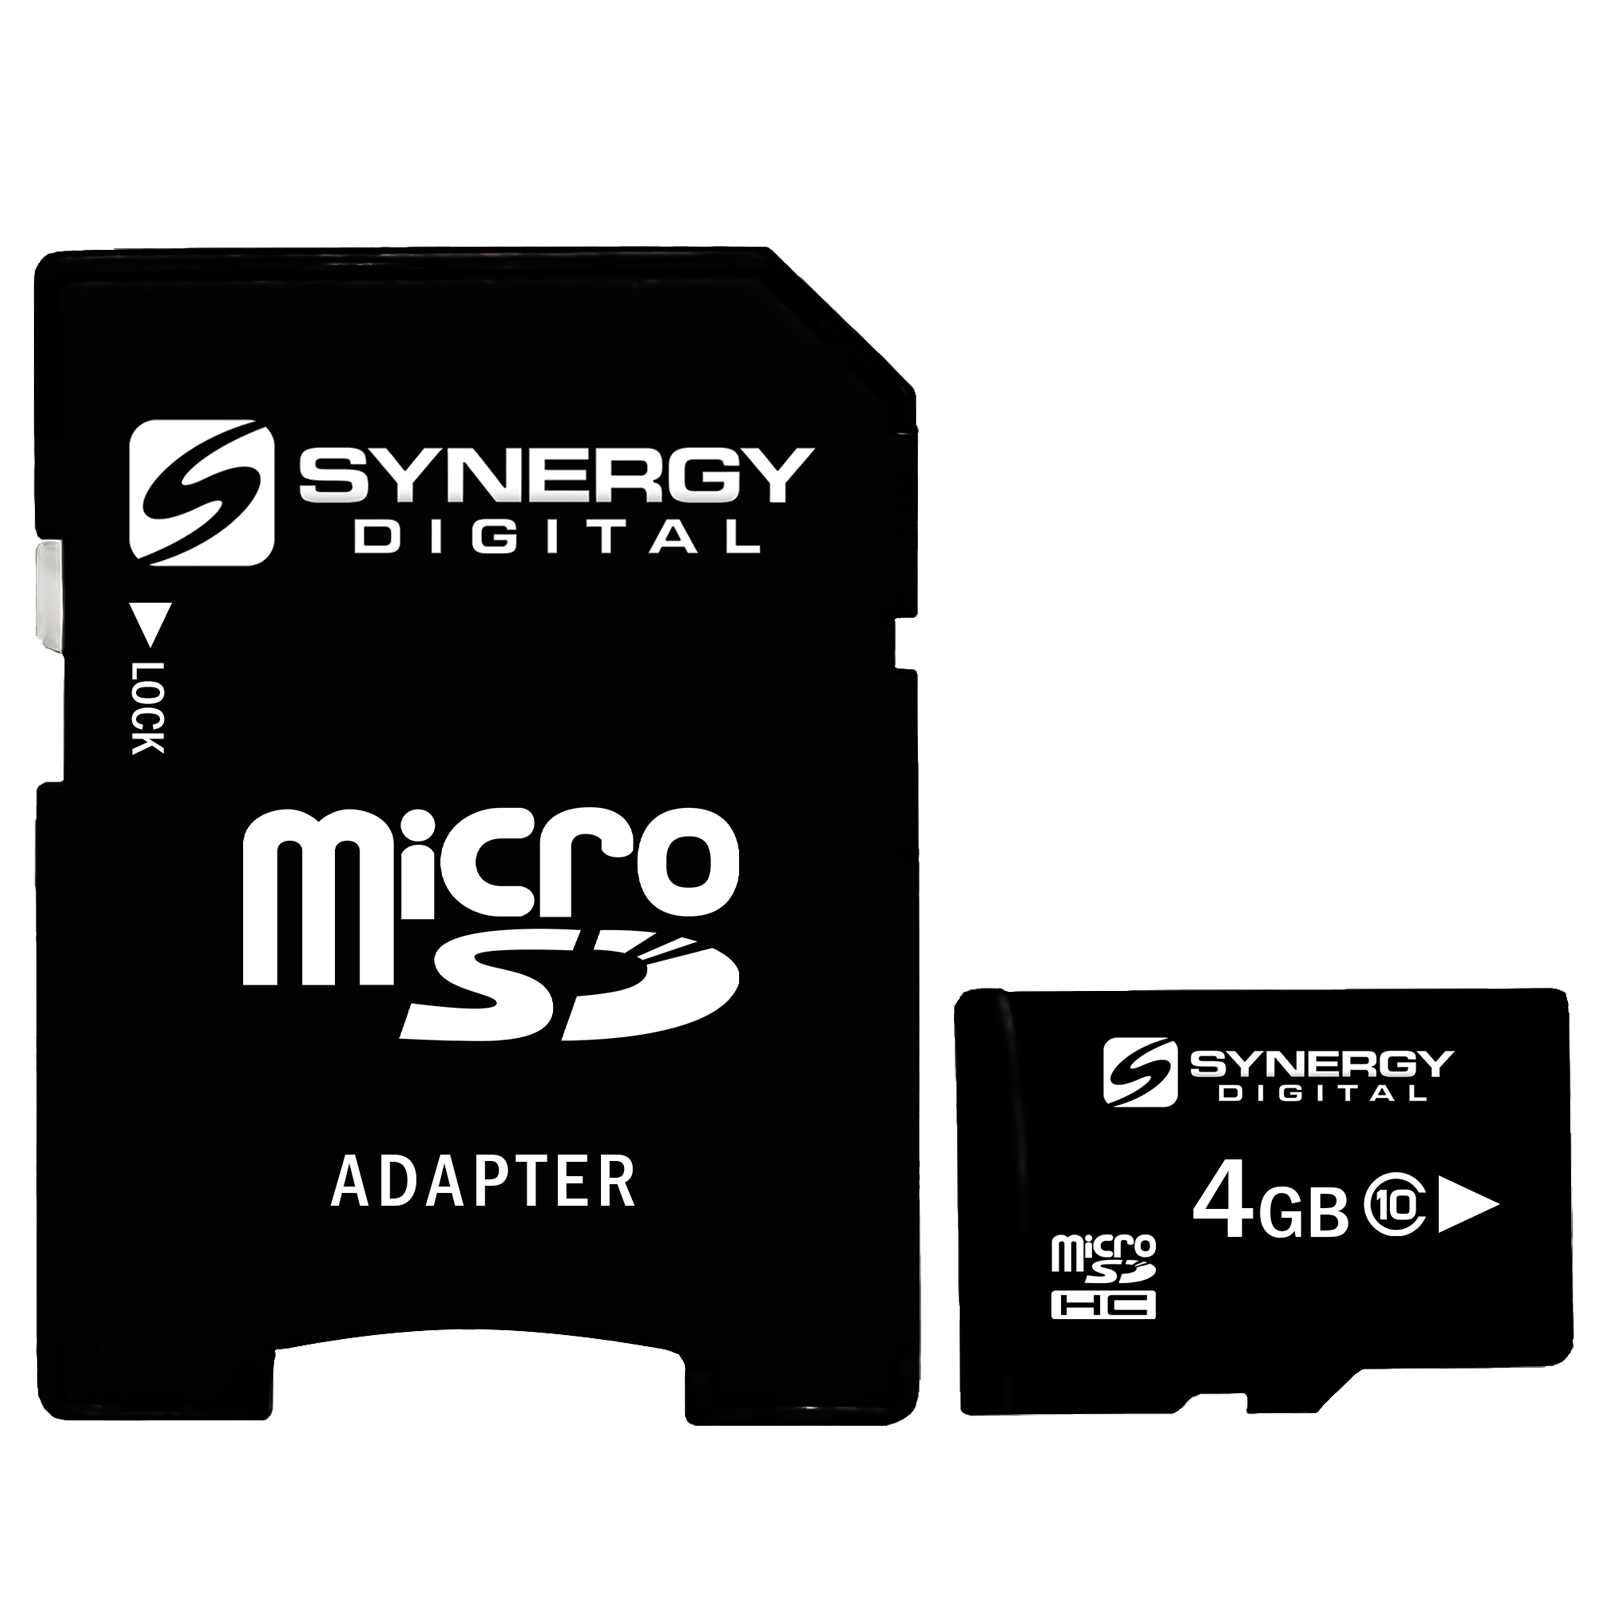 SDC4/4GB | 4GB microSDHC™ Memory Card with SD™ Adapter